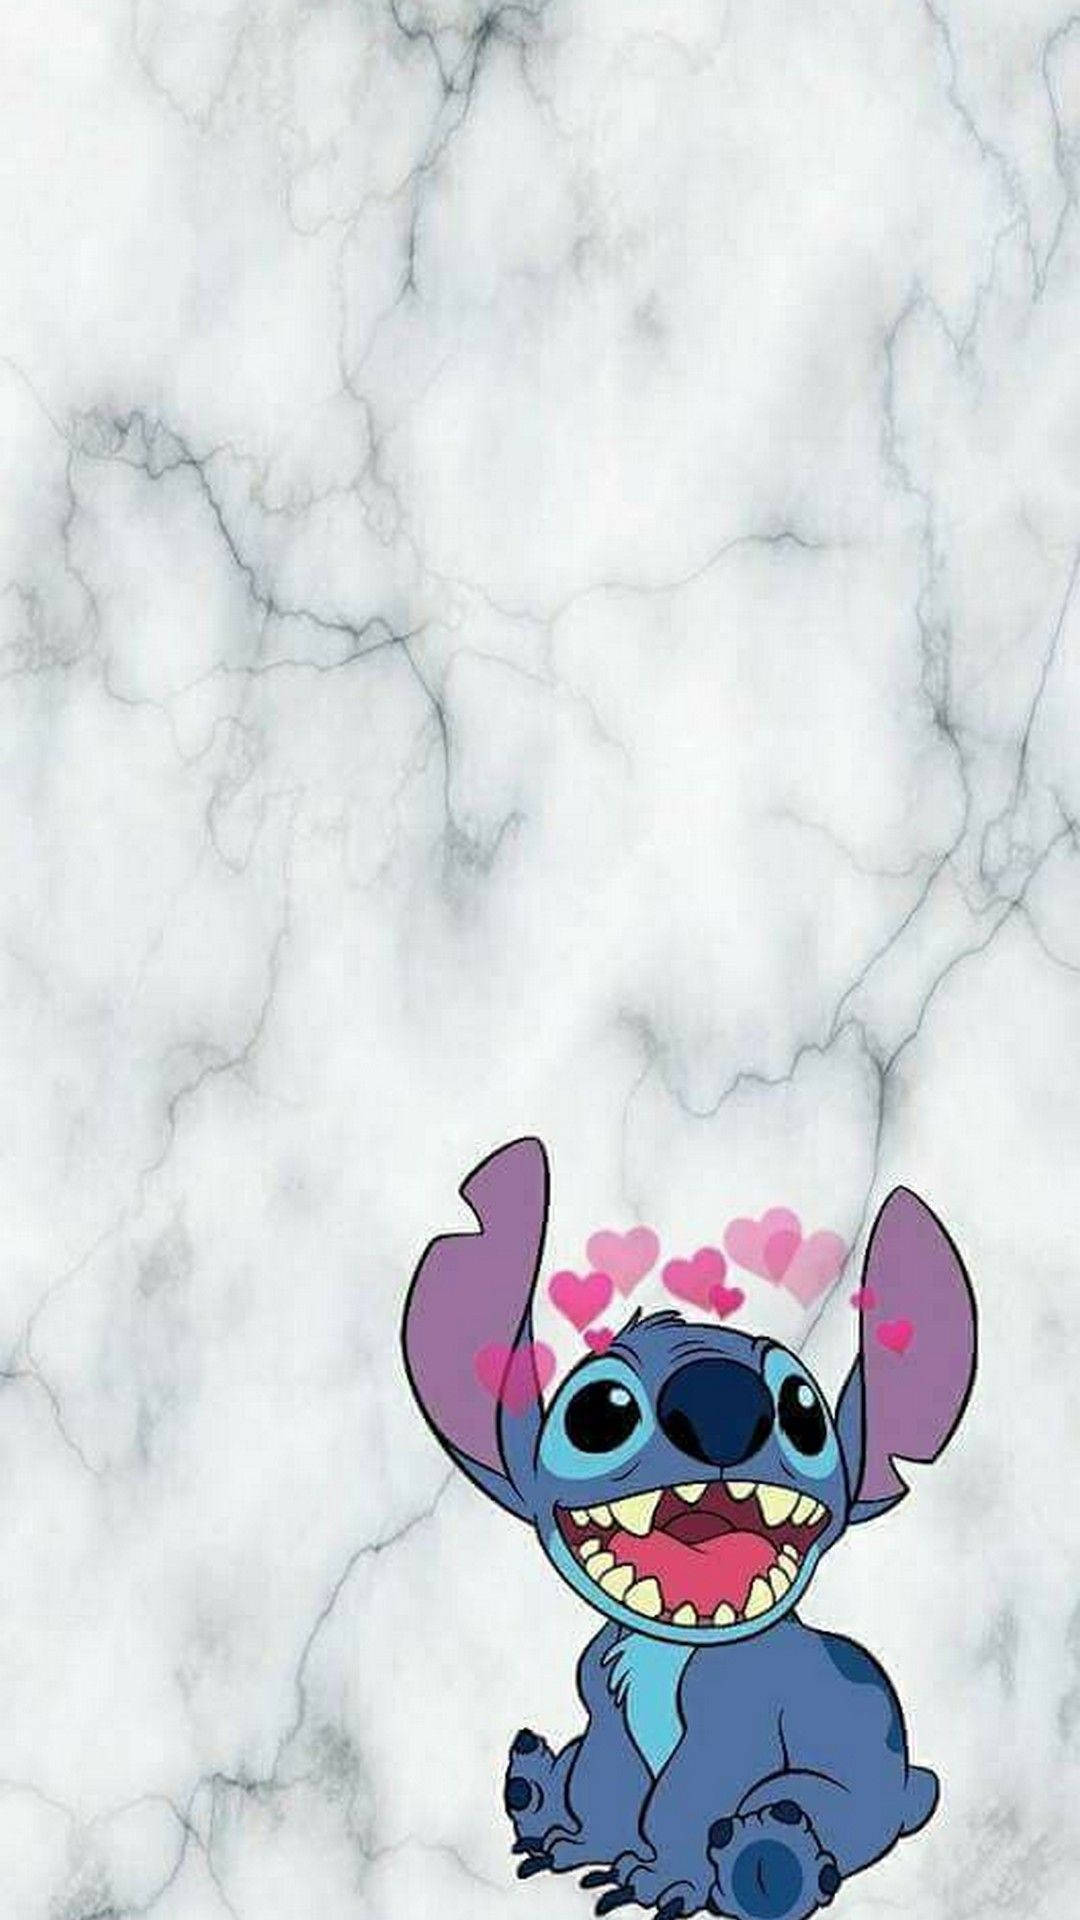 Cute Aesthetic Stitch With Heart Emojis Background